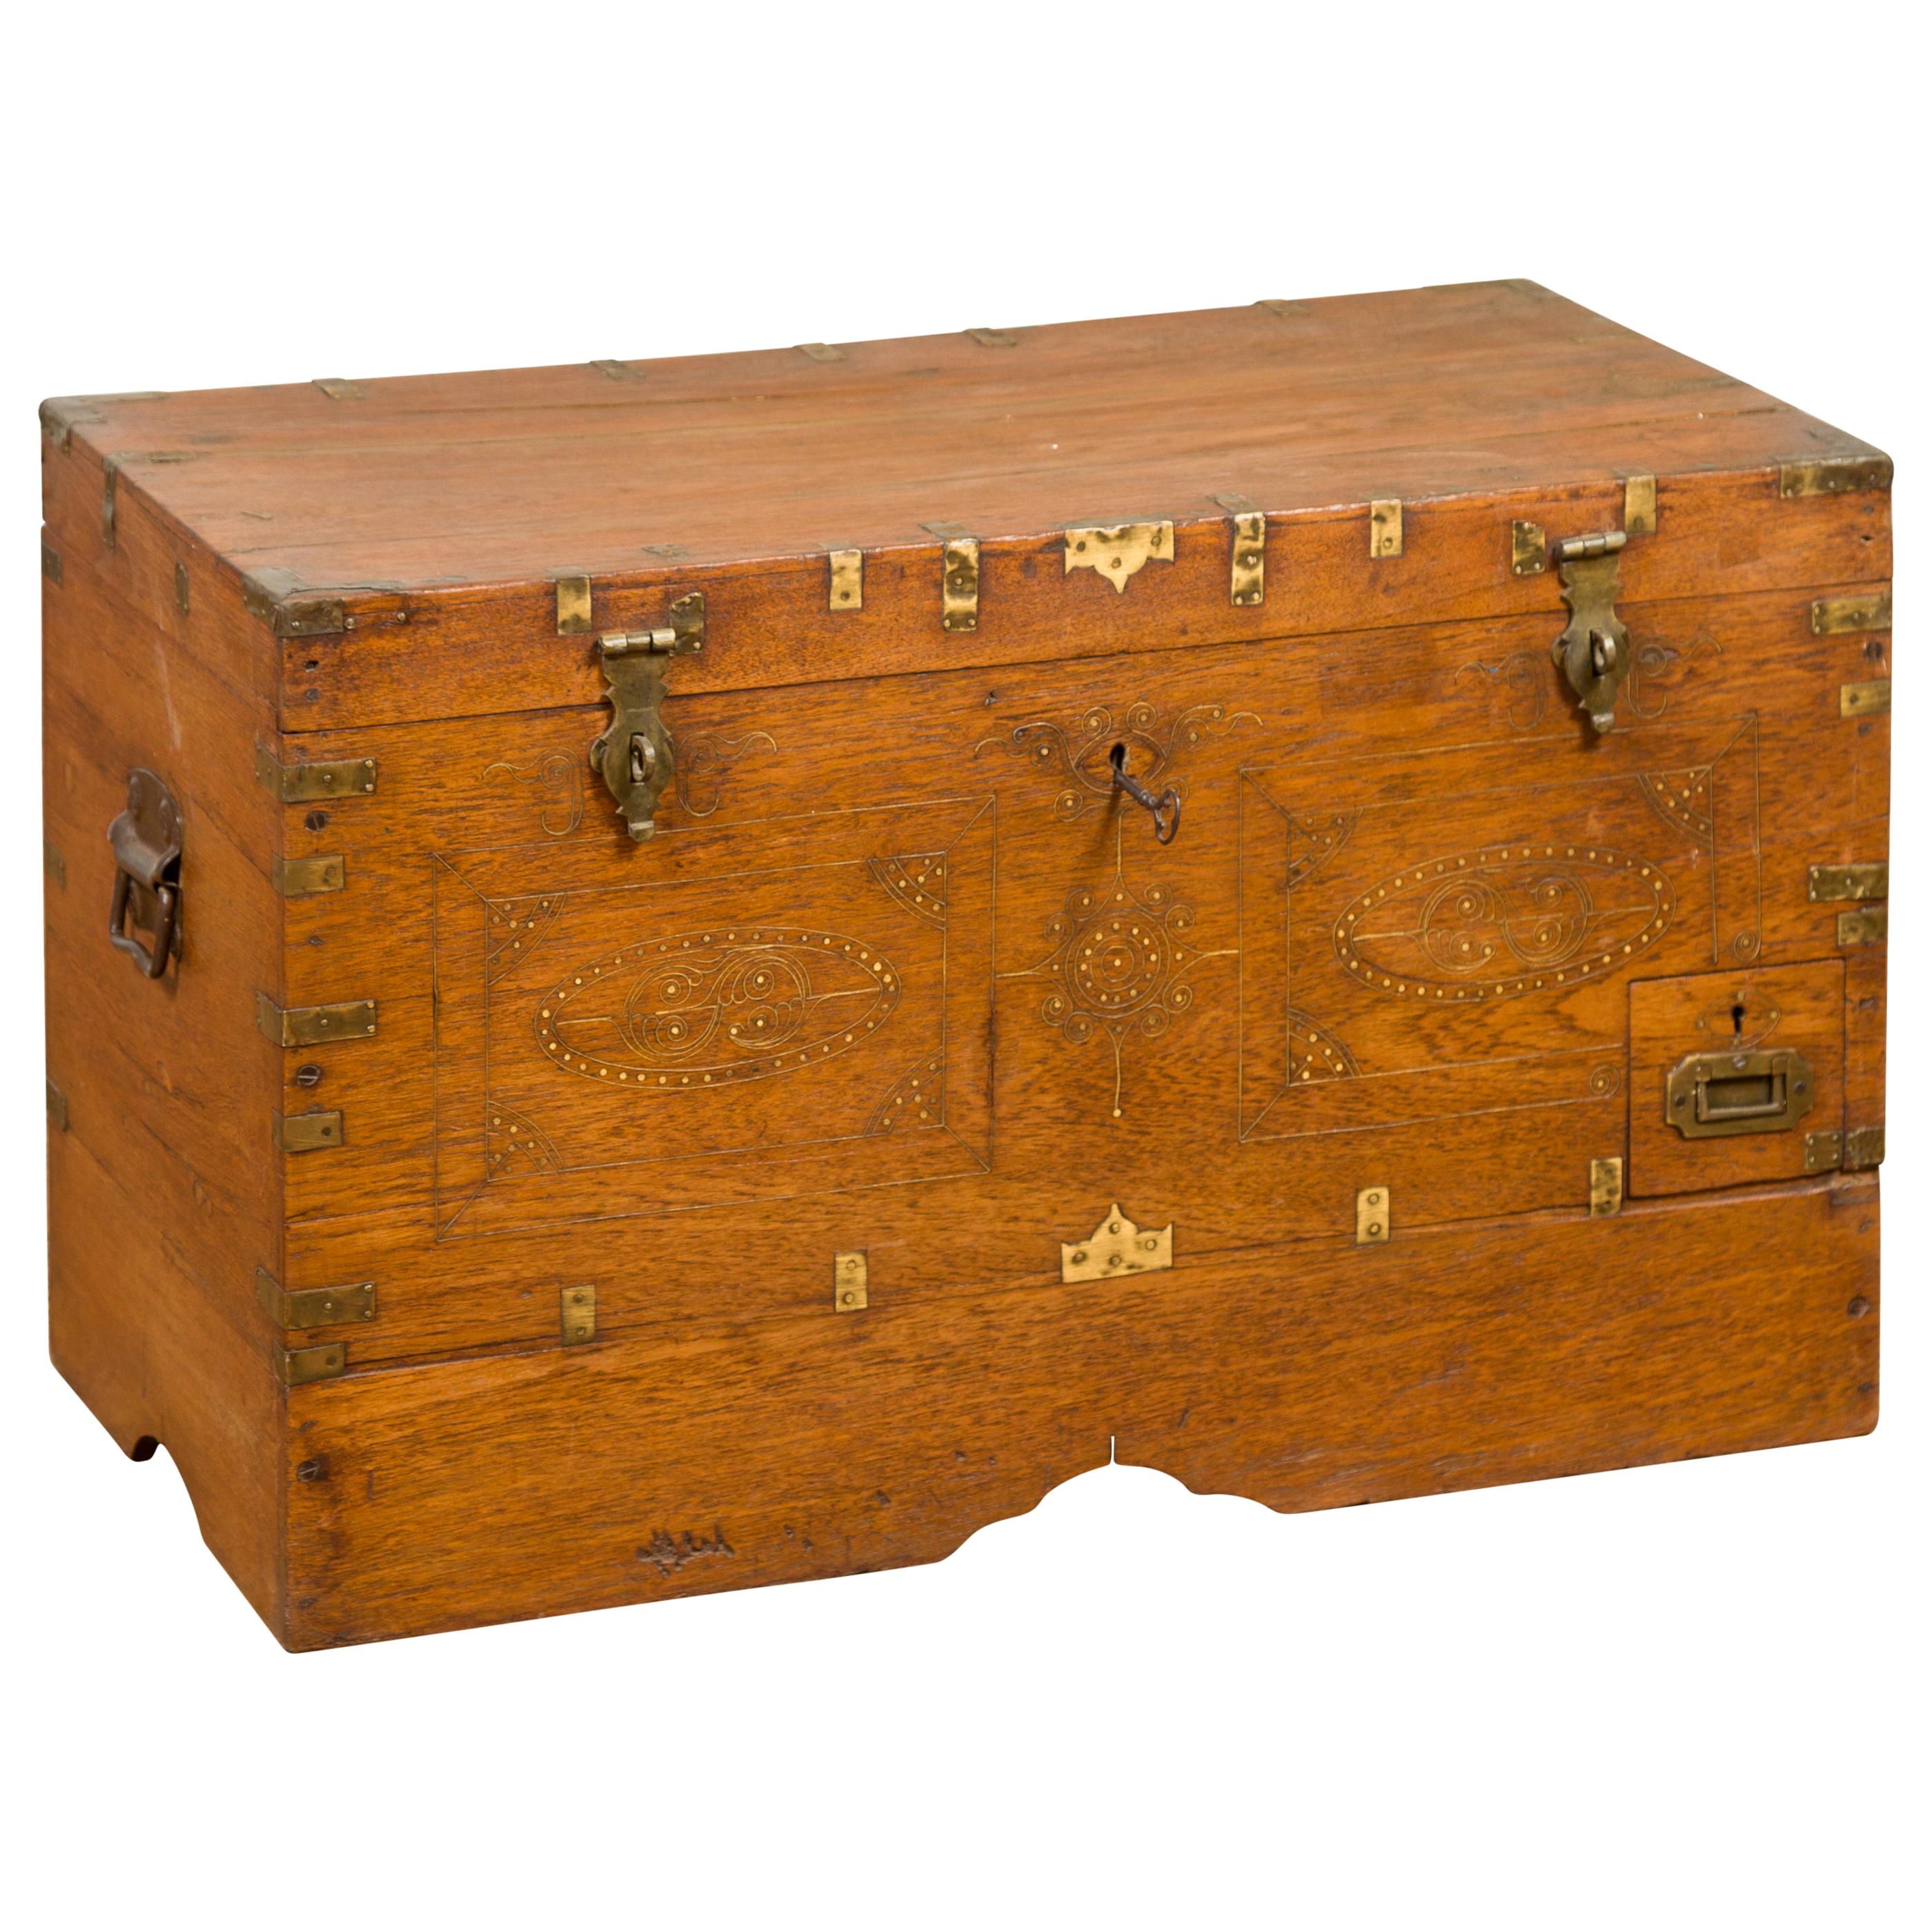 Antique Indonesian Wooden Compartmented Wedding Chest with Brass Accents